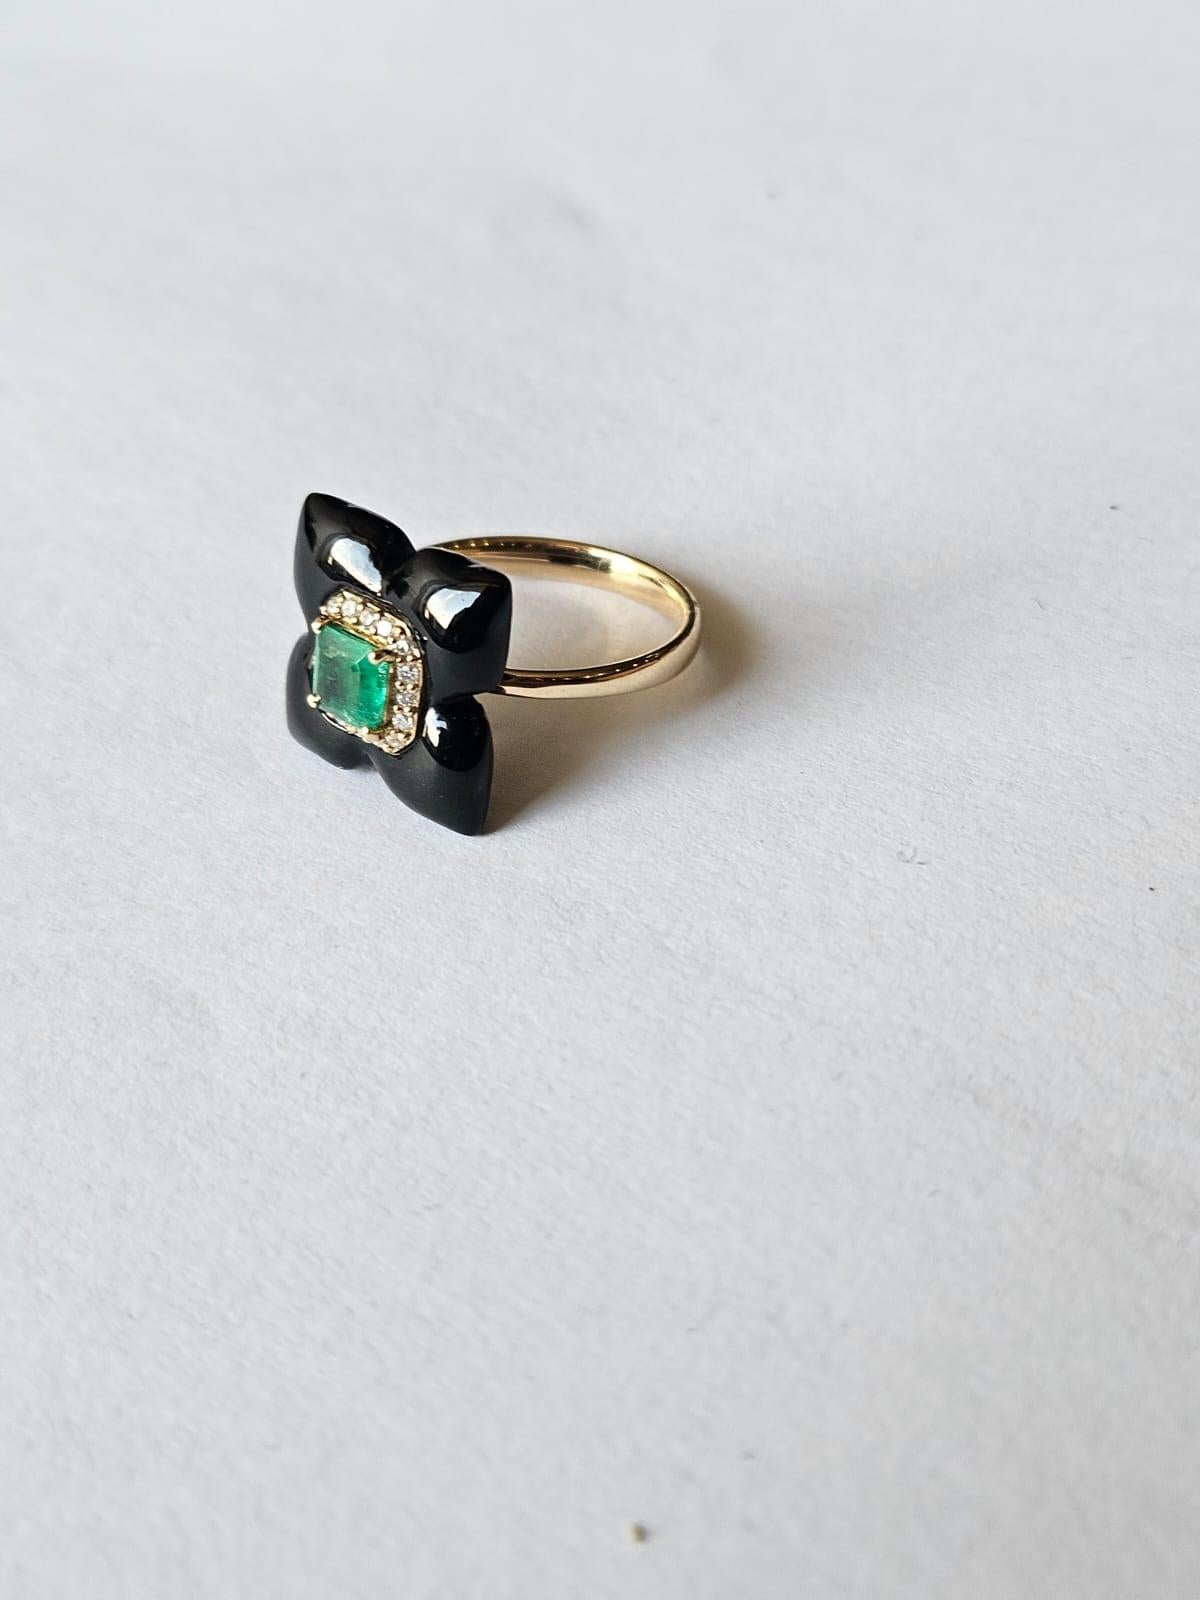 Square Cut Set in 18K Gold, natural Zambian Emerald, Black Onyx & Diamonds Cocktail Ring For Sale